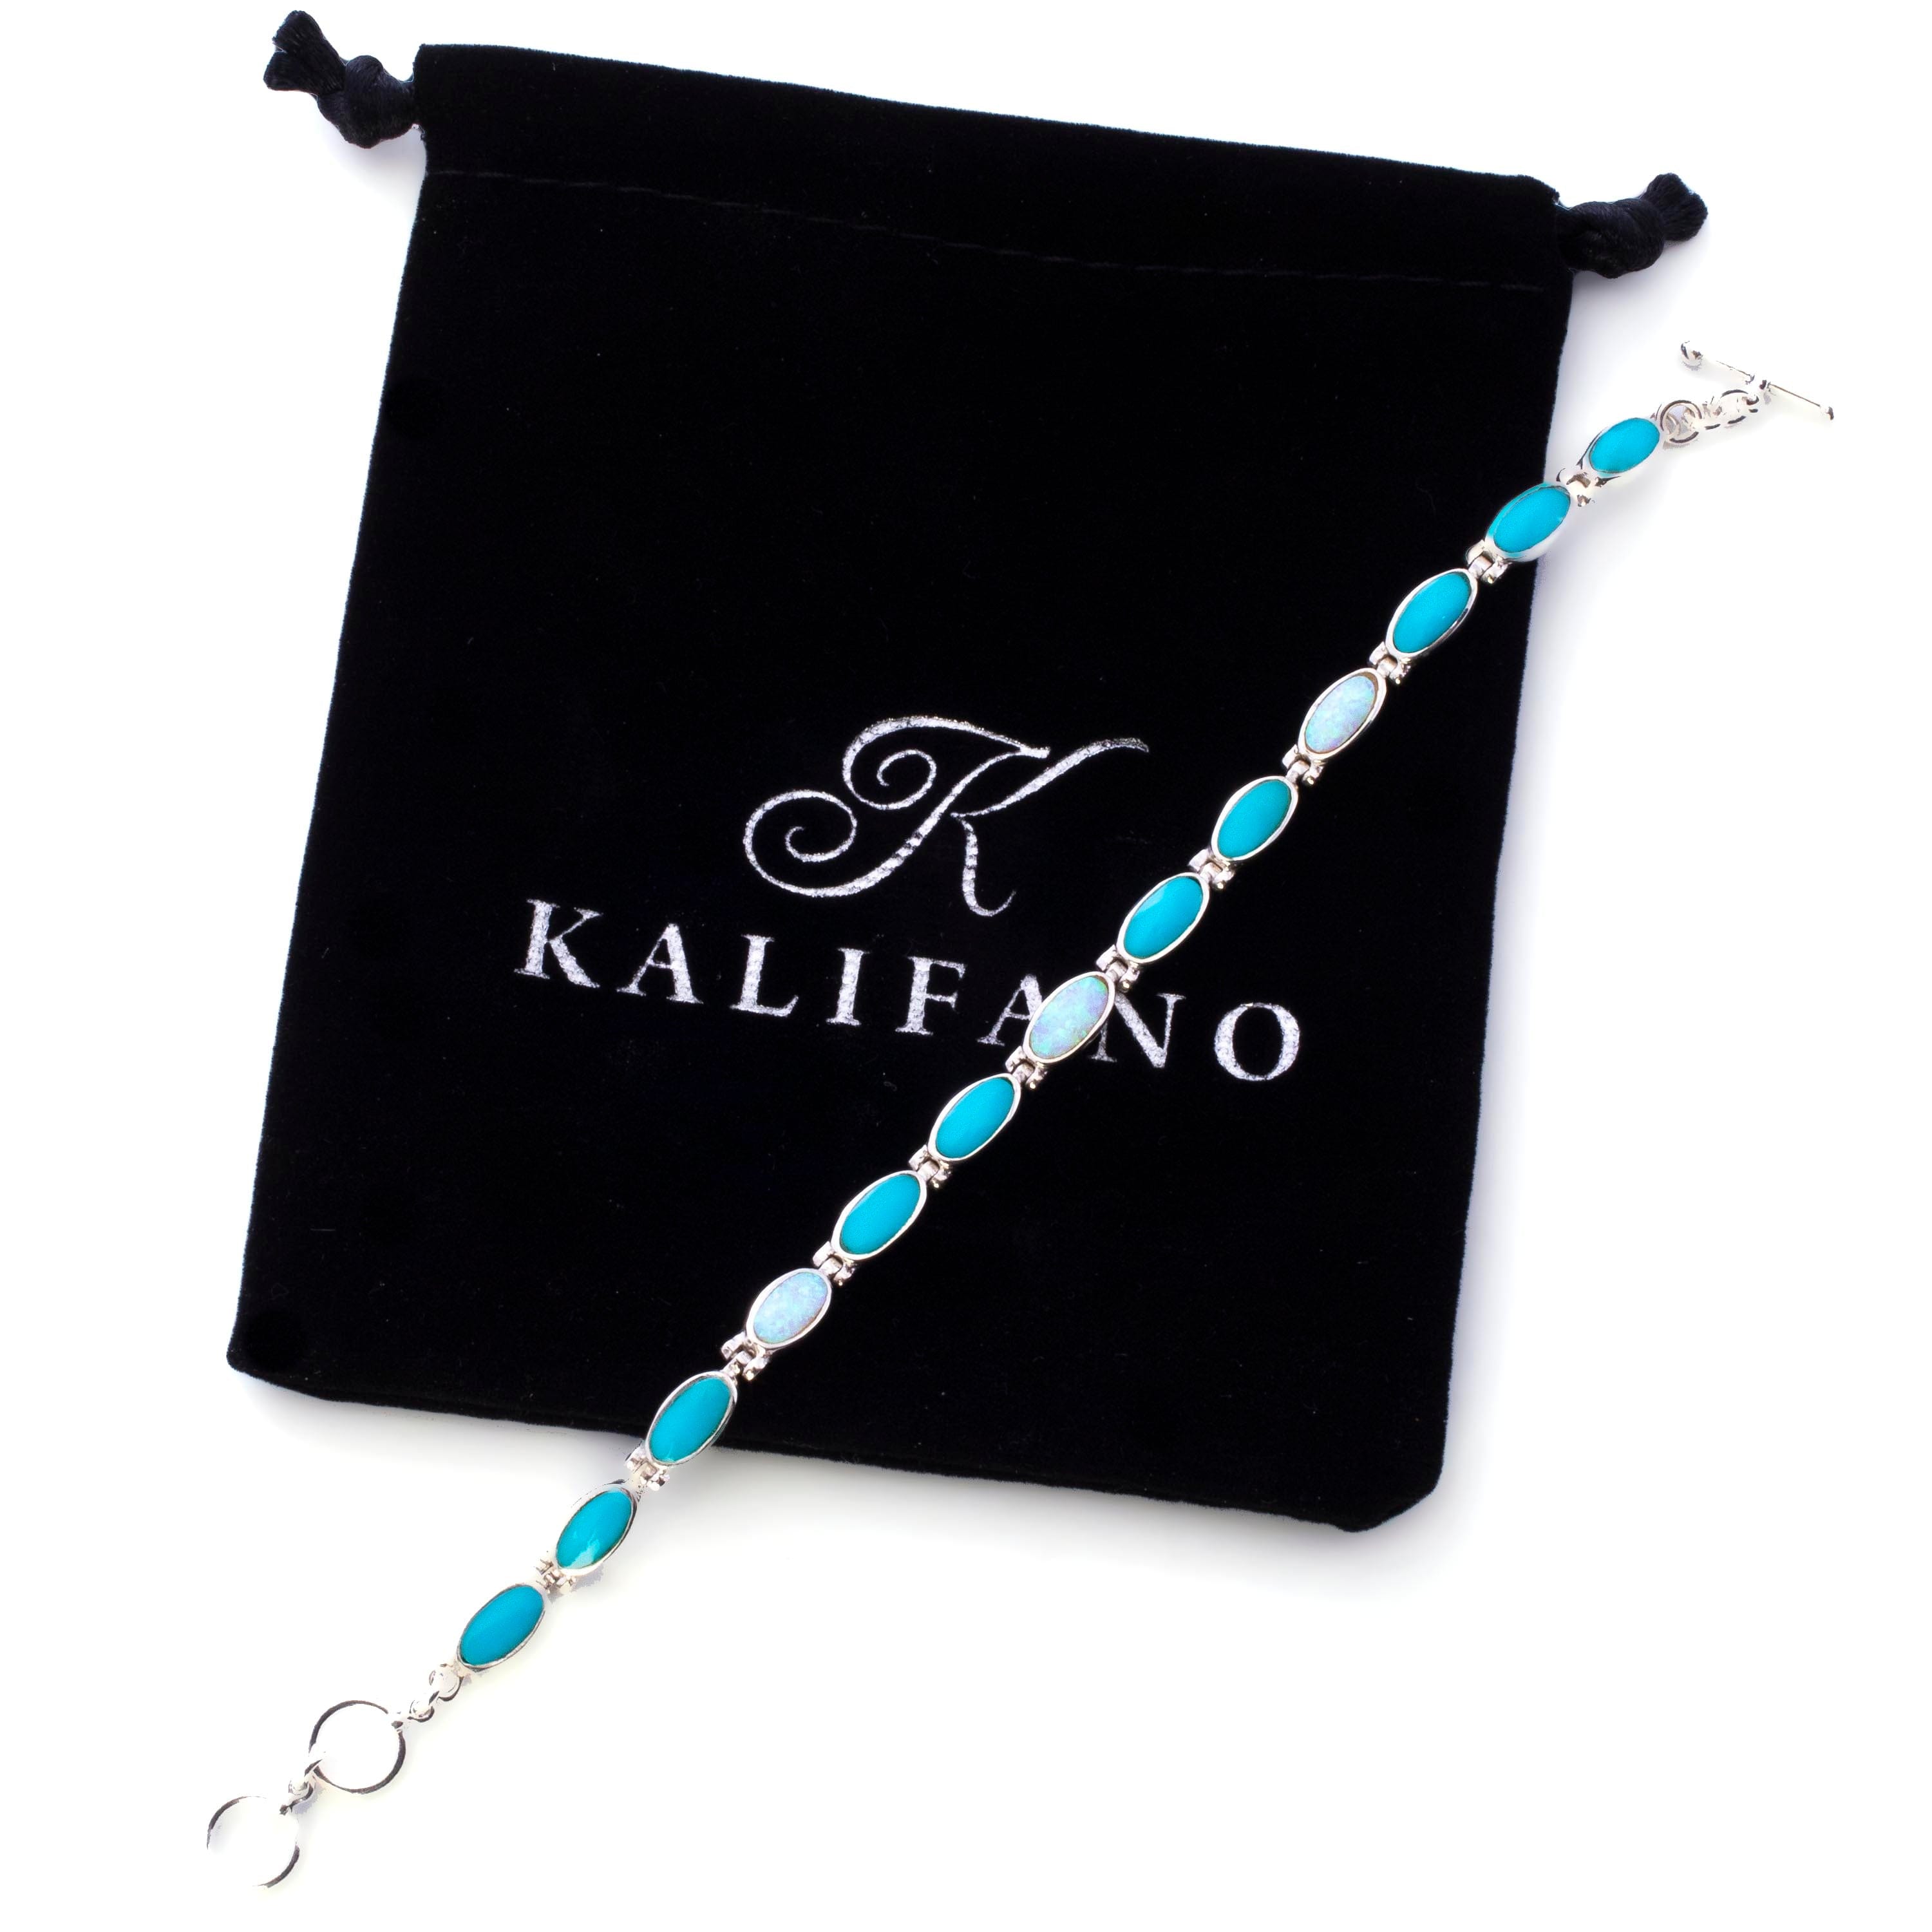 Kalifano Southwest Silver Jewelry Turquoise and Opal Oval 925 Sterling Silver Bracelet USA Handmade NMB.0559.TQ